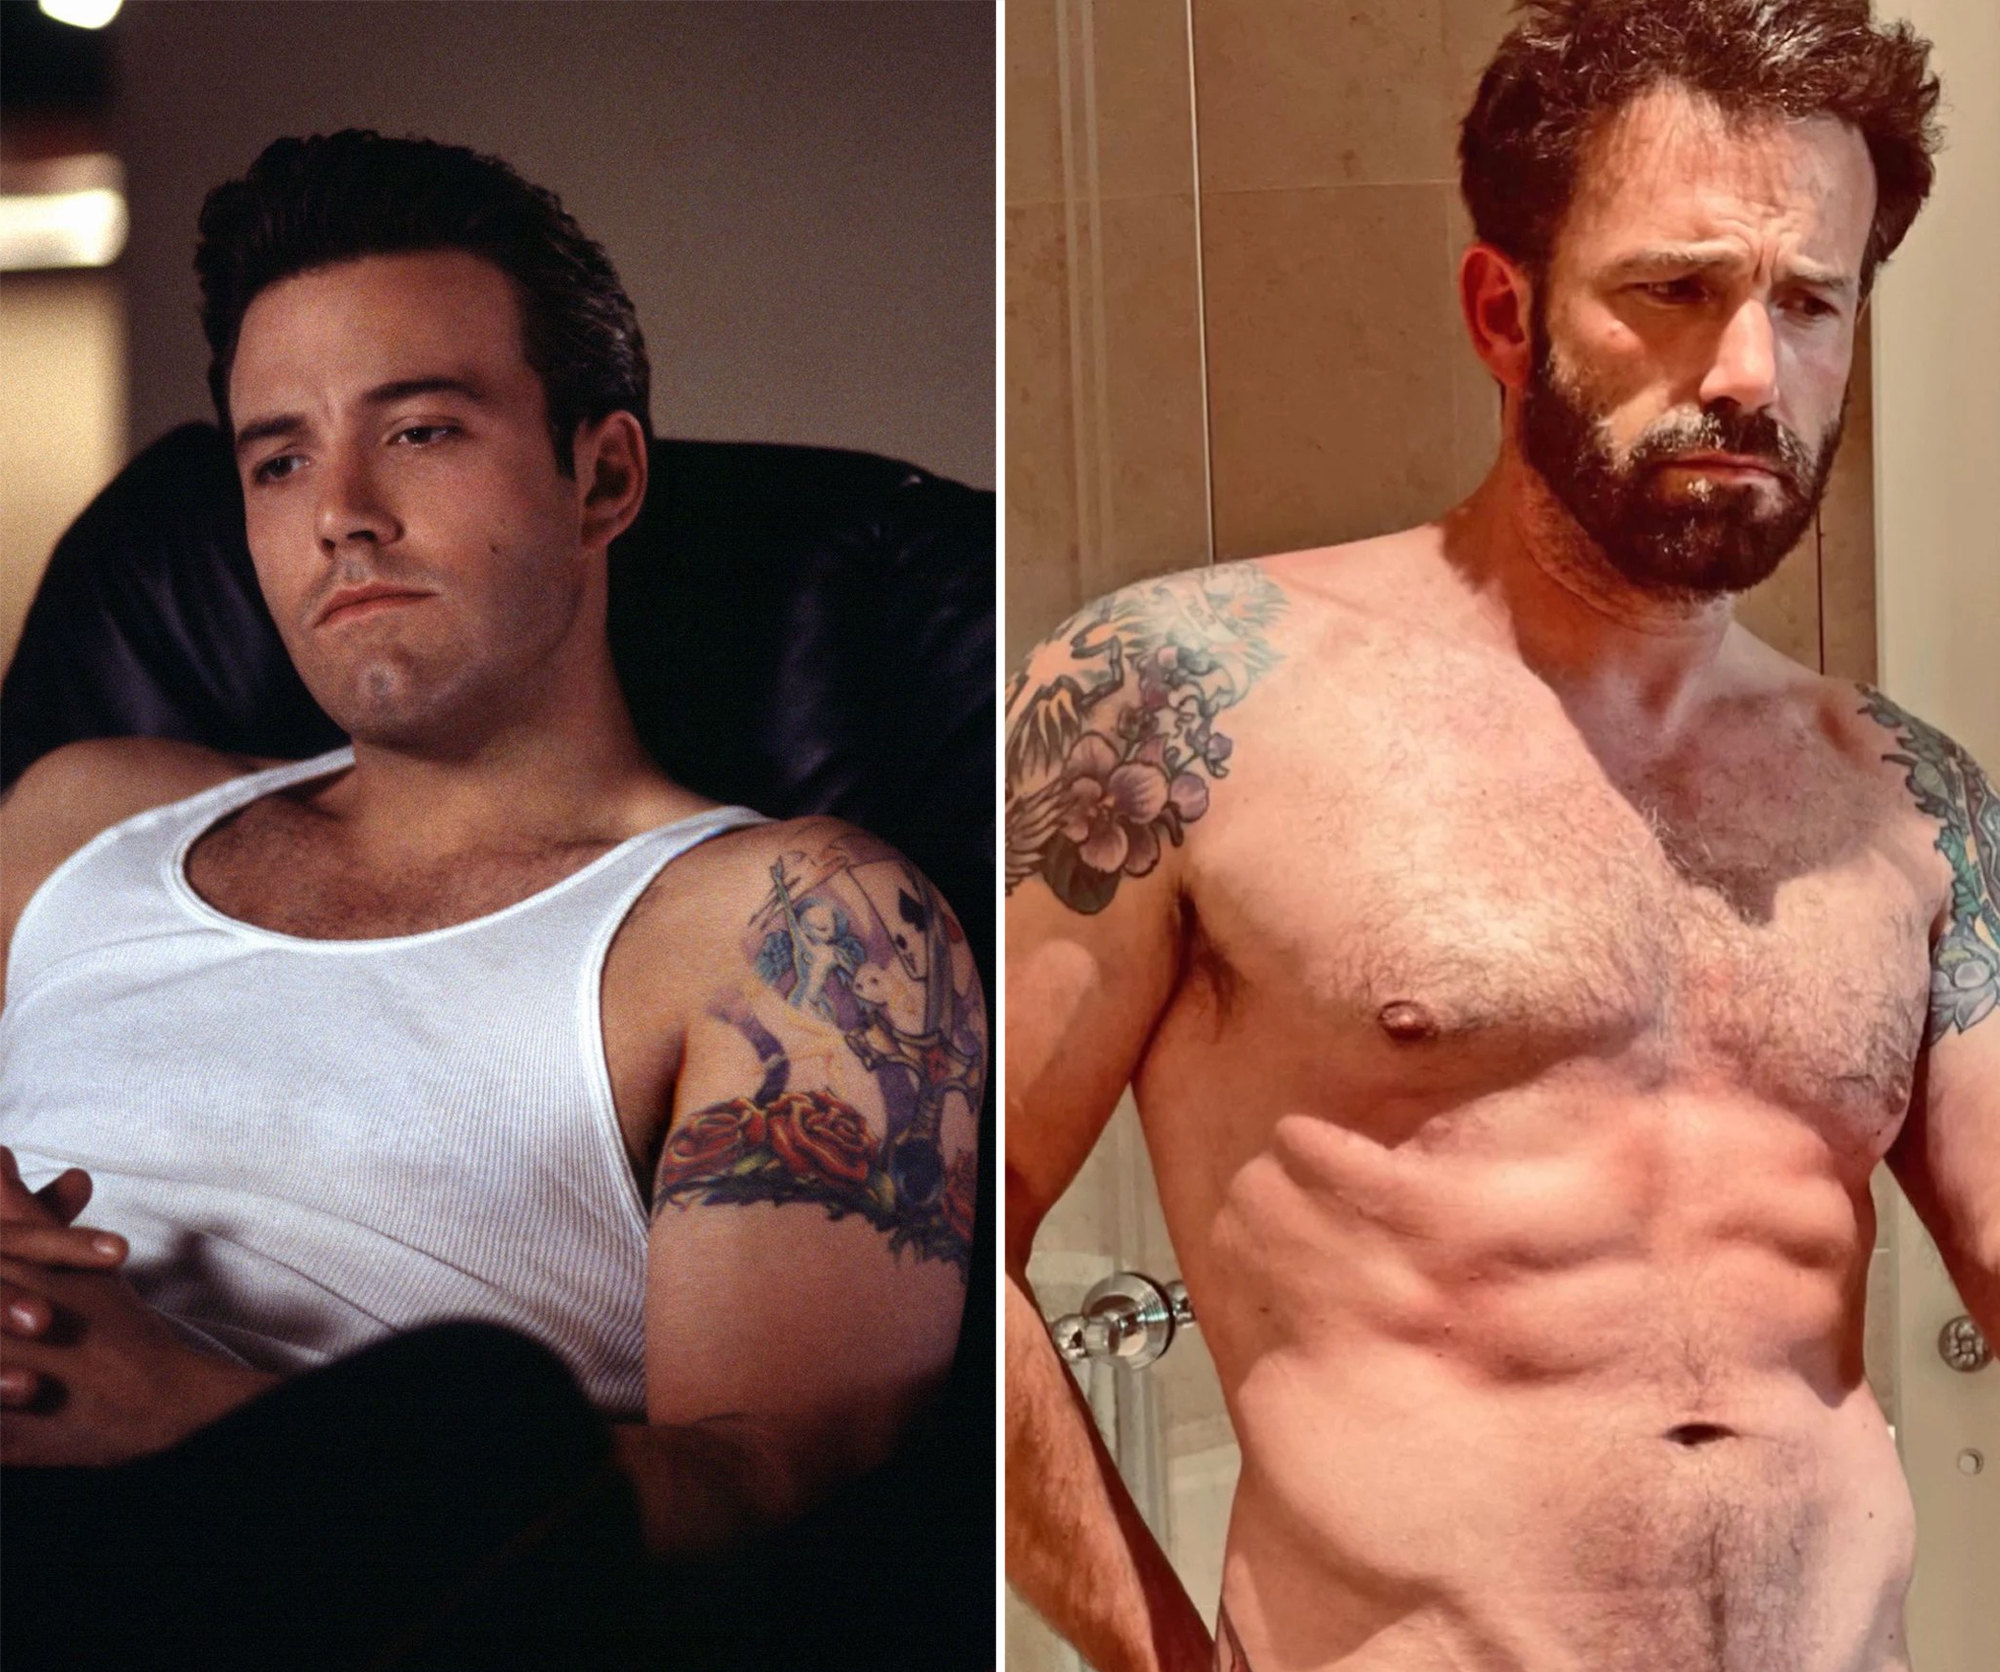 The return of Ben Affleck  and that back tattoo